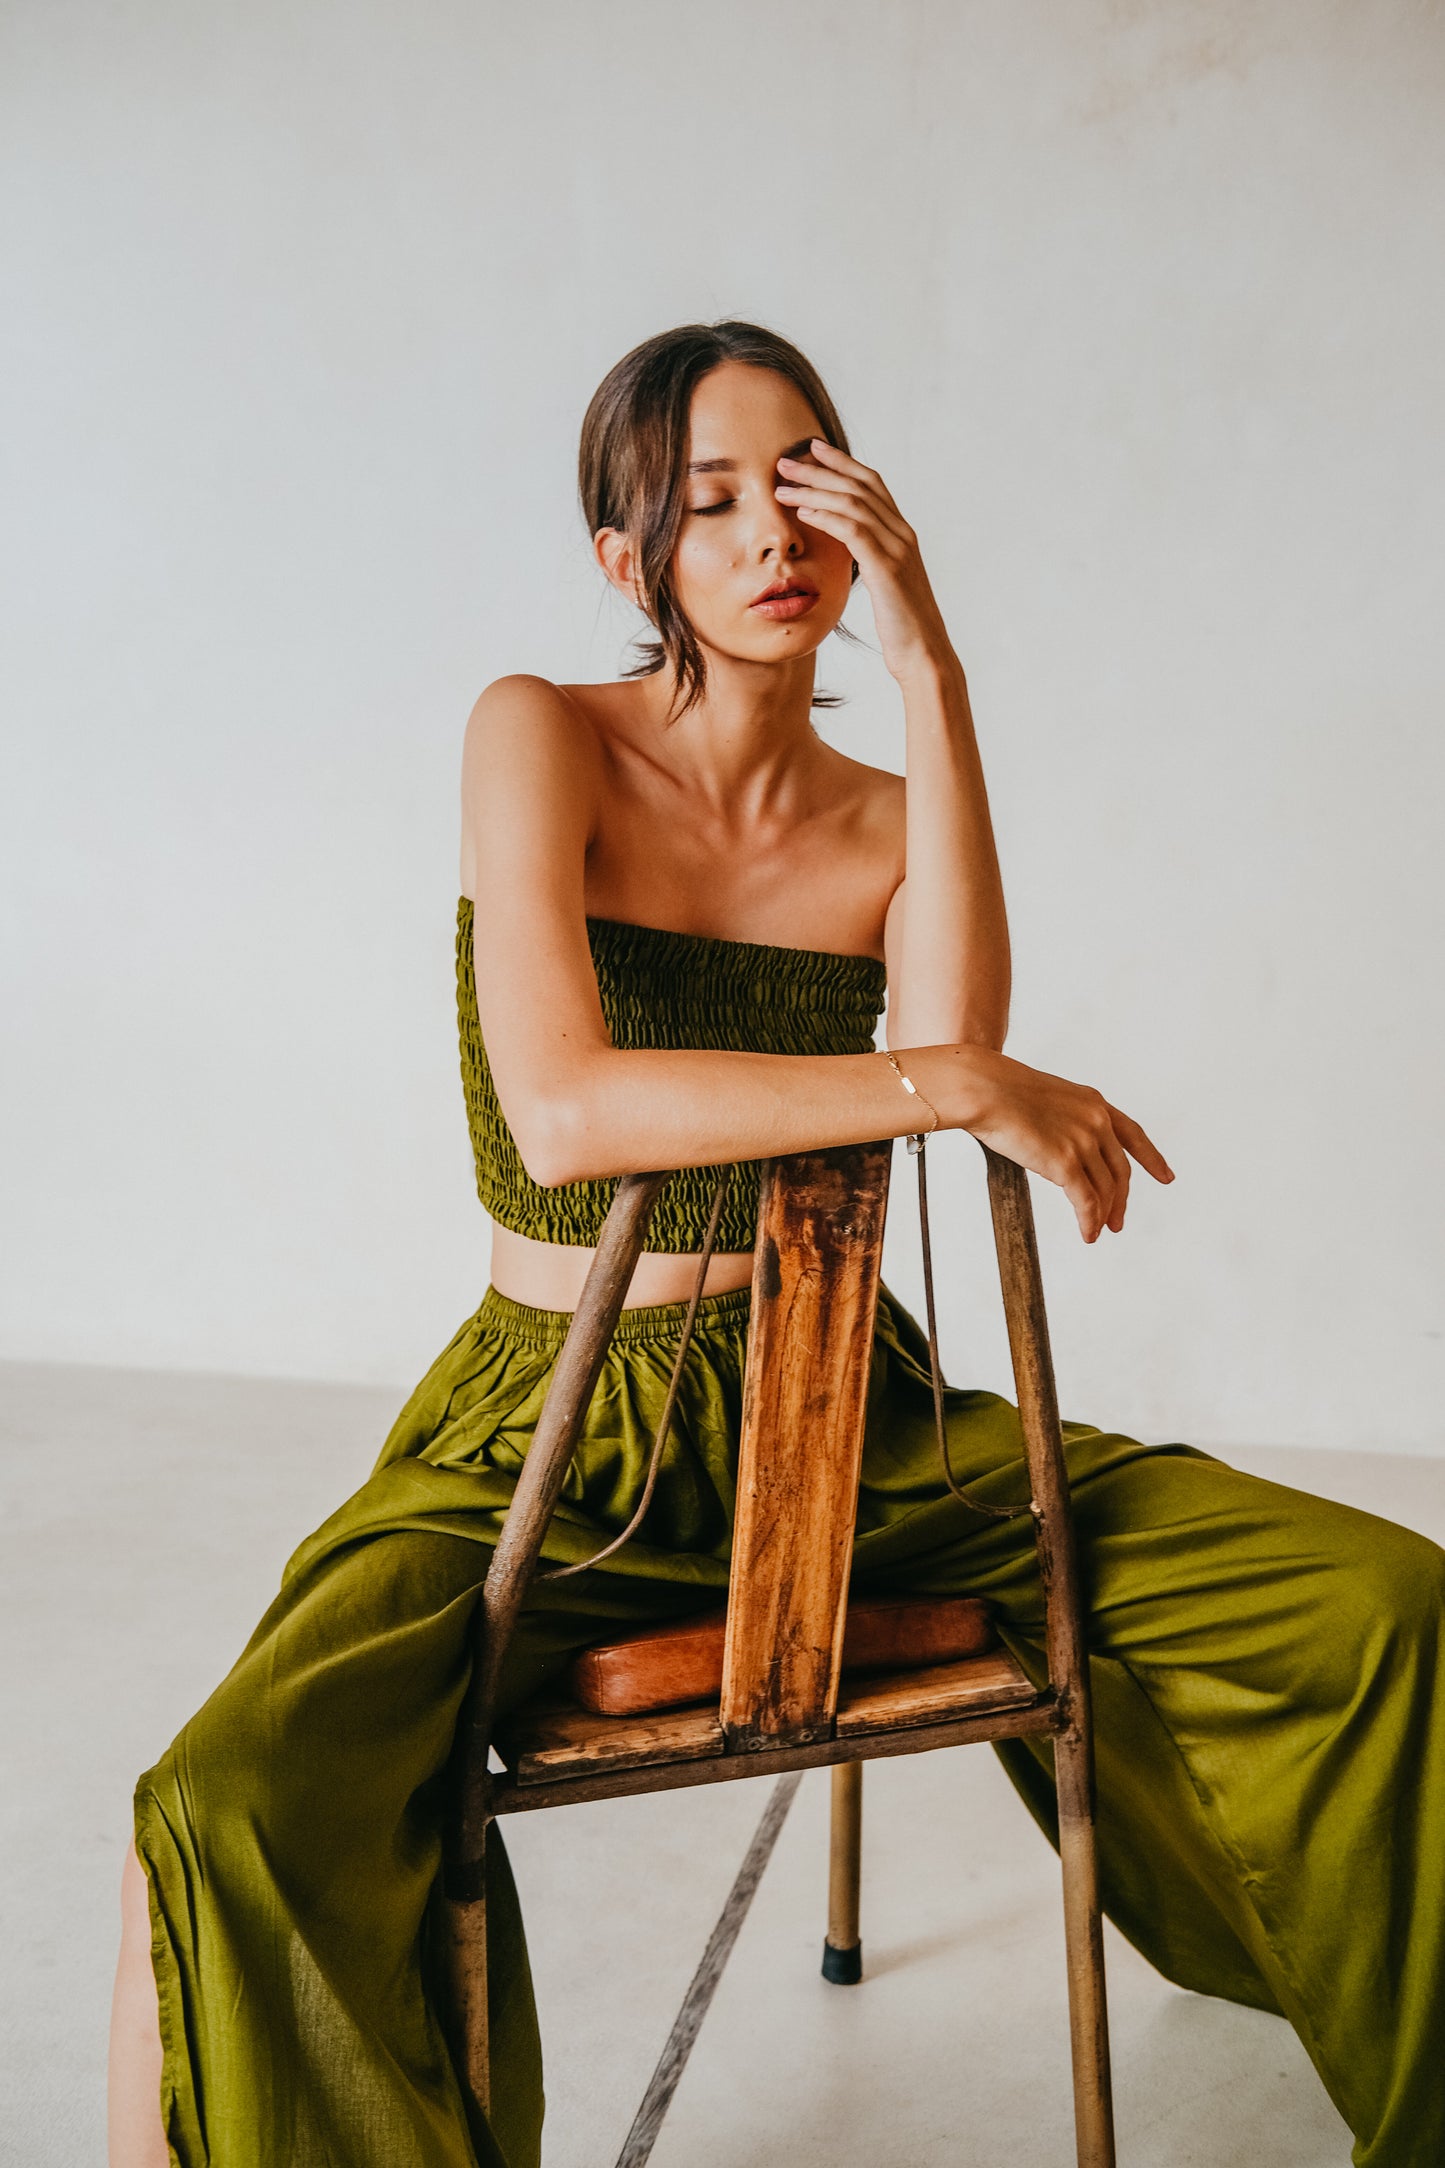 Load image into Gallery viewer, Judith Side Split Pants With Matching Tube Top Set in Olive
